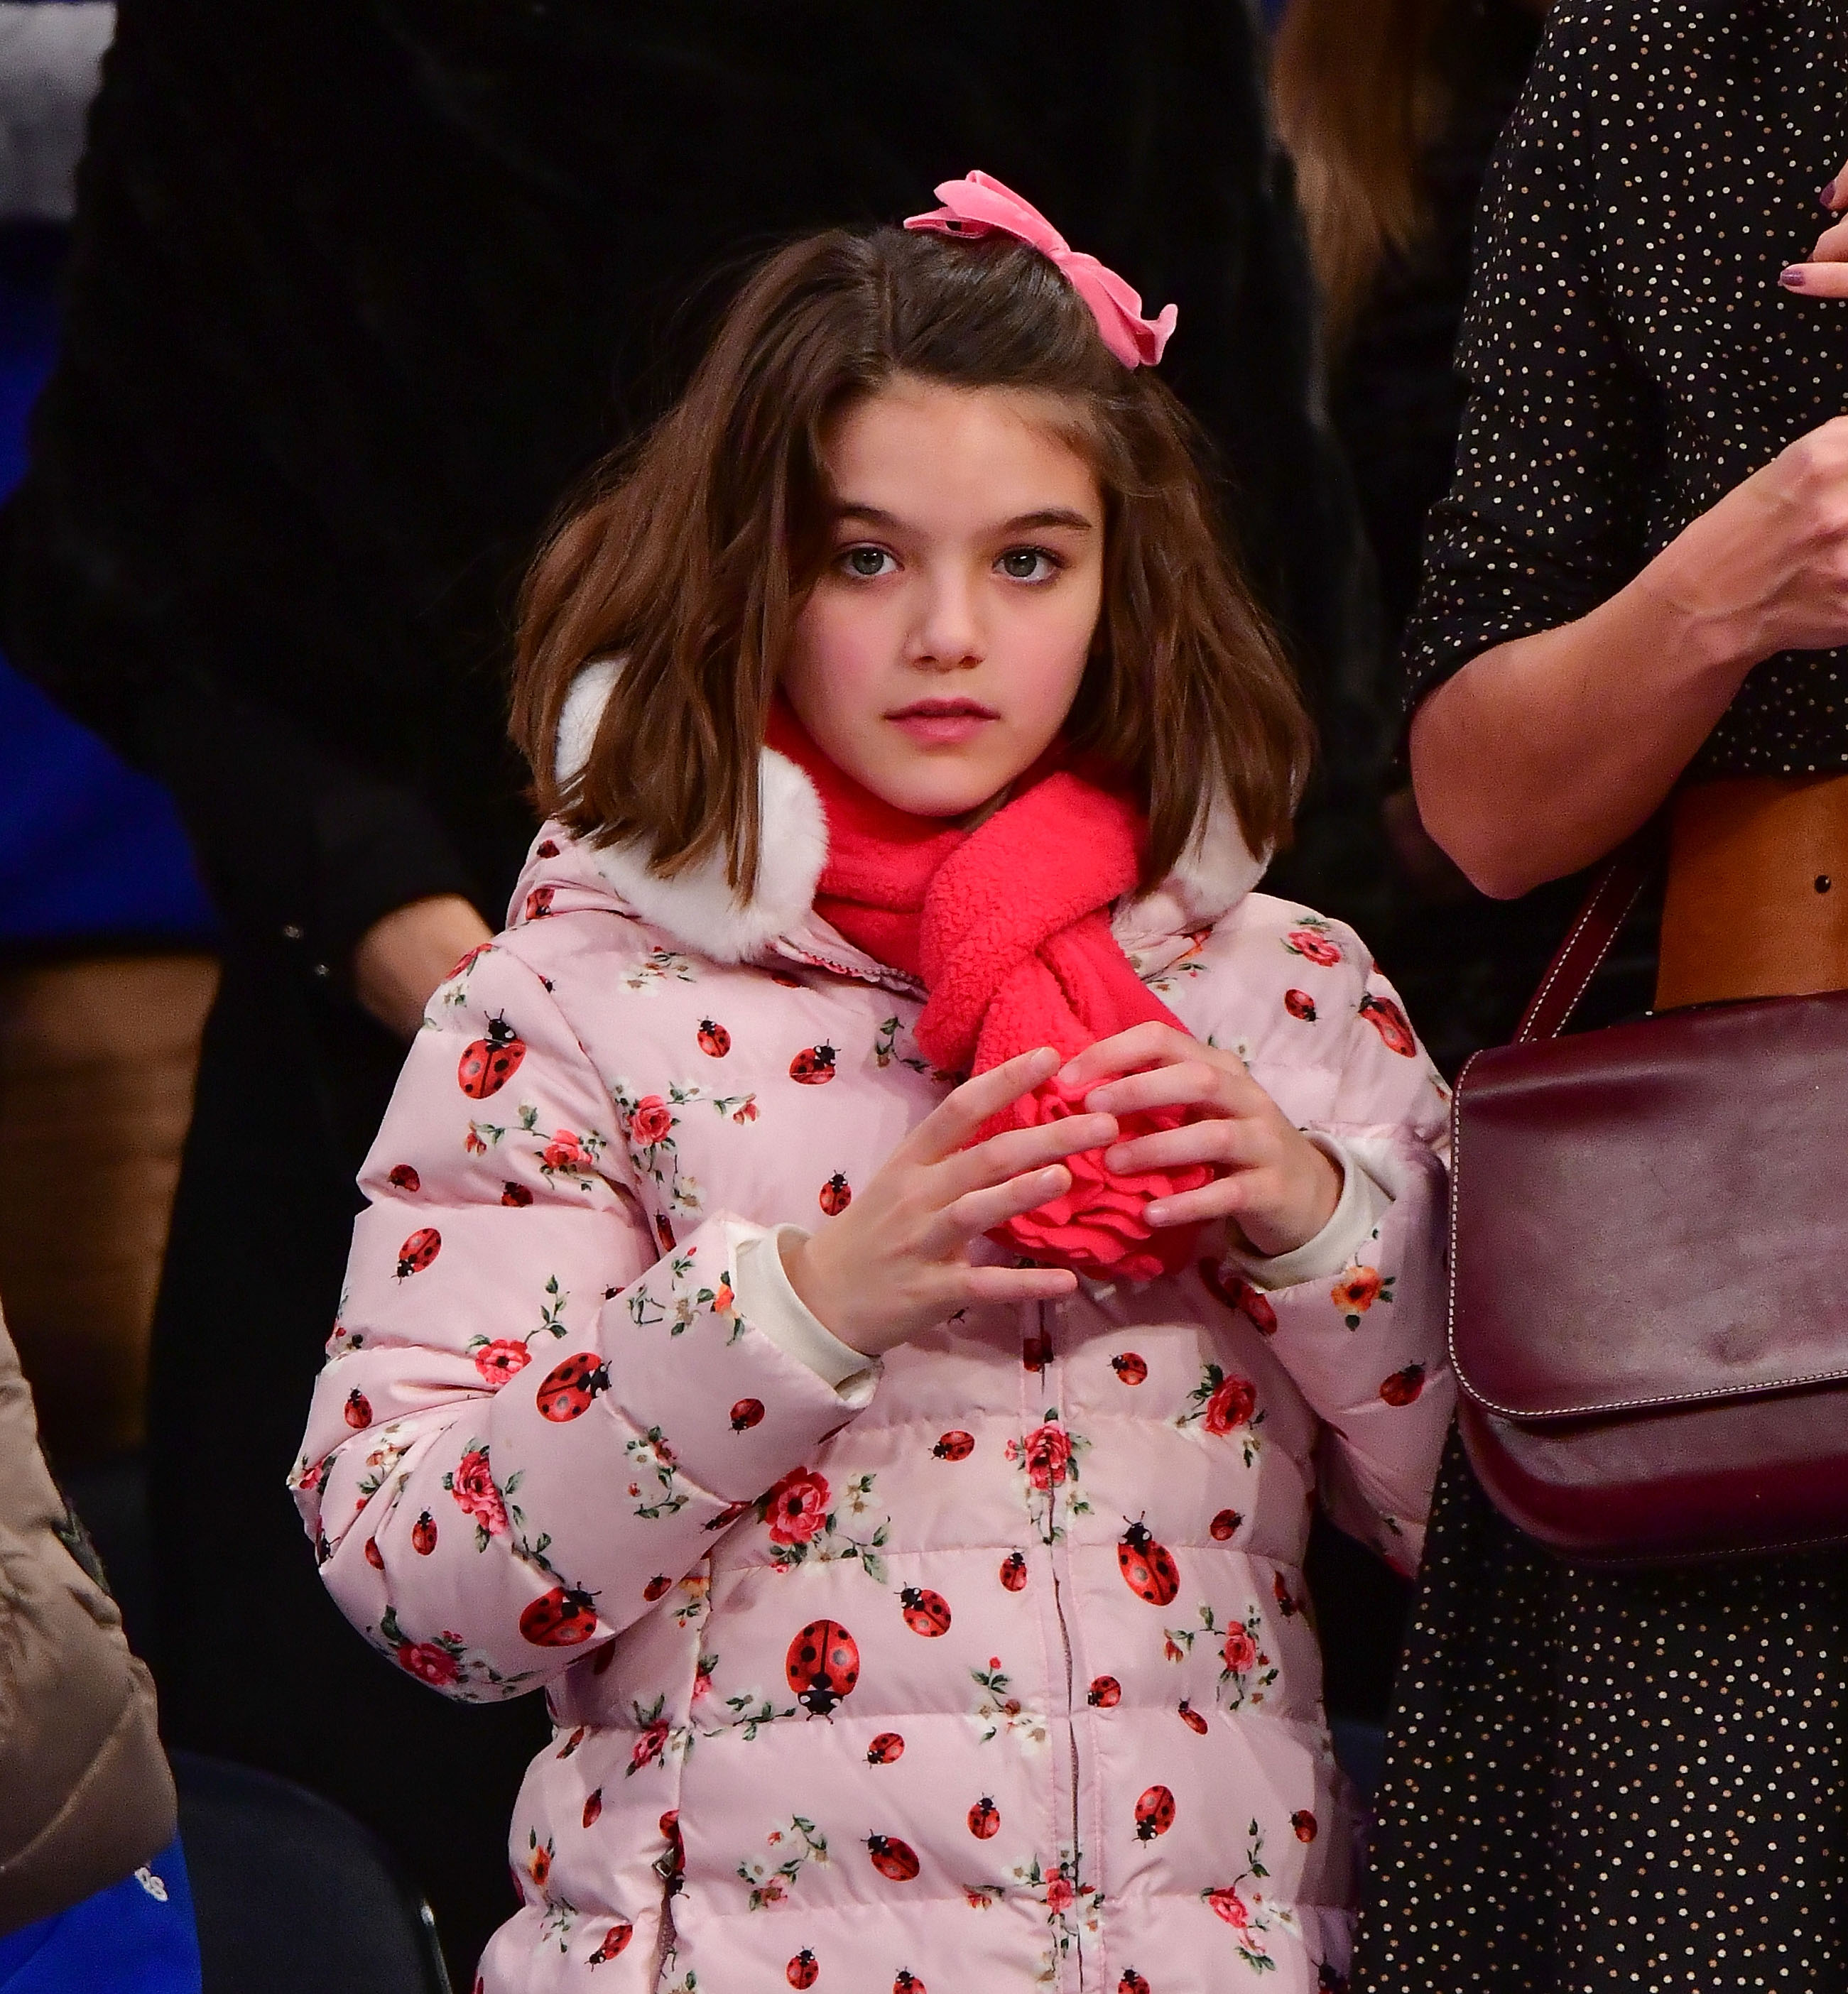 Suri Cruise at a basketball game at Madison Square Garden on December 16, 2017 in New York City. | Source: Getty Images